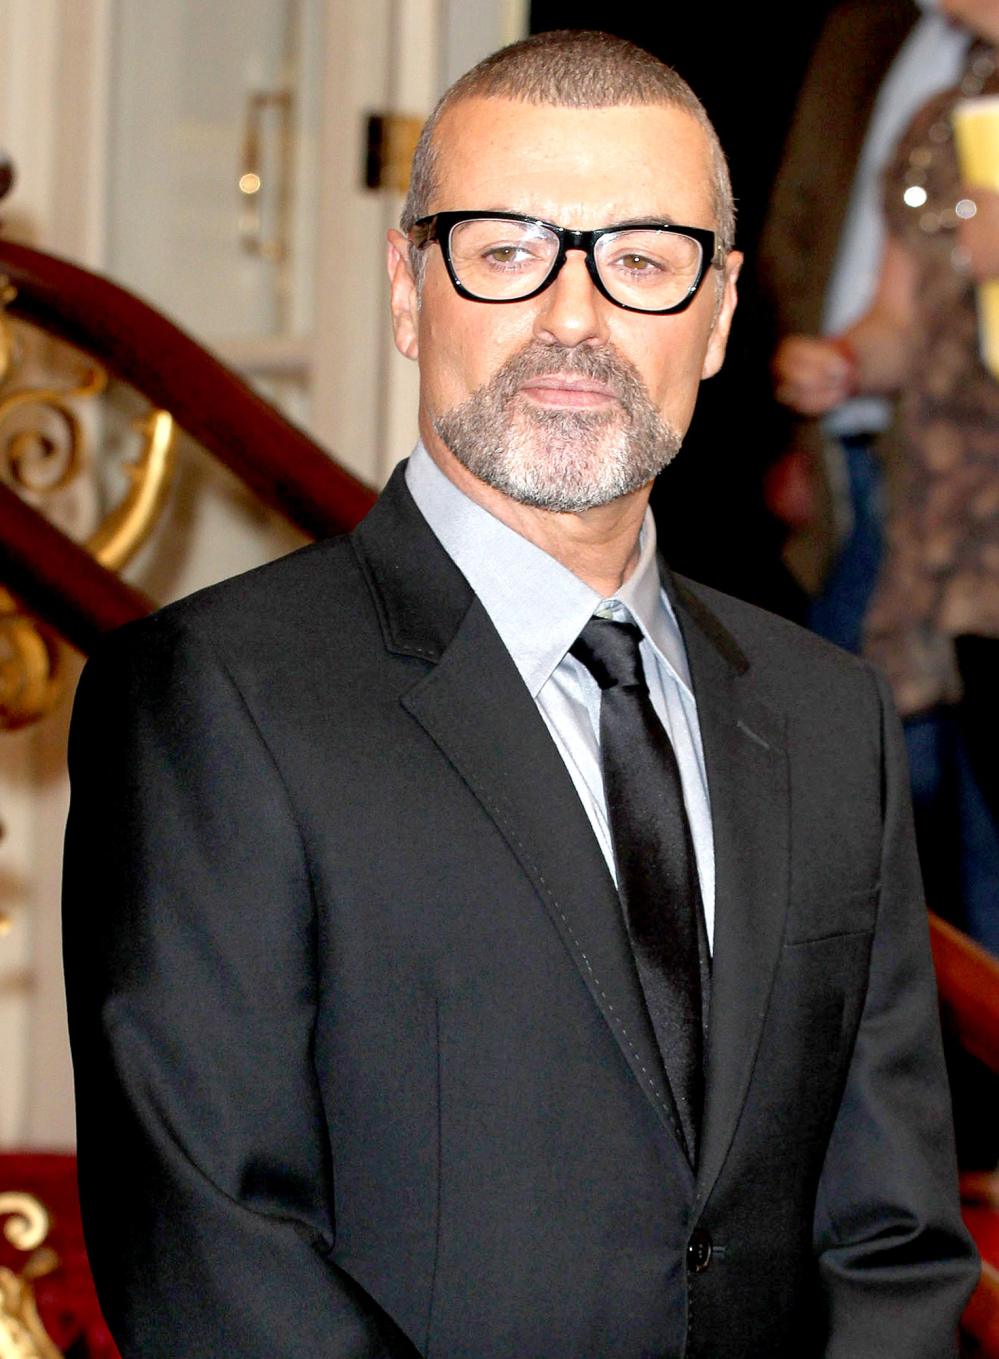 George Michael attends a press conference to announce his new European tour, Symphonica: The Orchestral Tour at The Royal Opera House on May 11, 2011 in London, England.